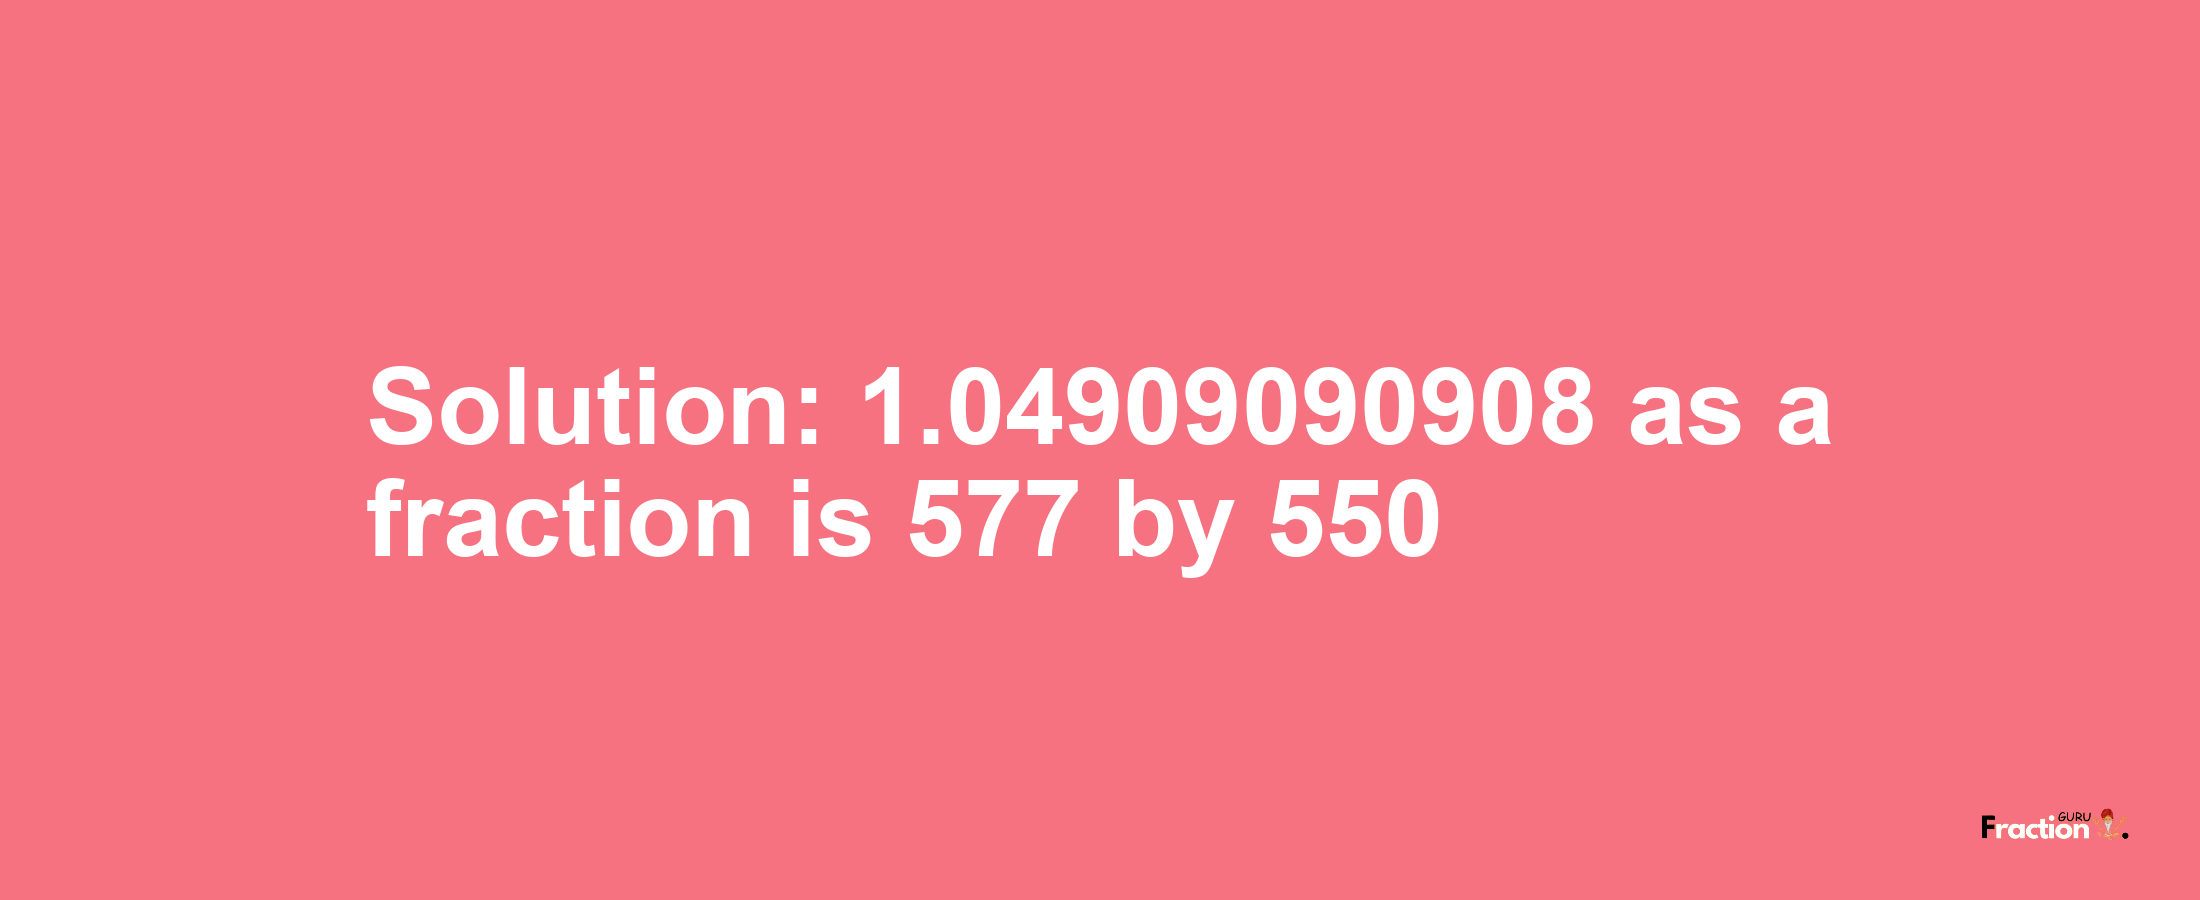 Solution:1.04909090908 as a fraction is 577/550